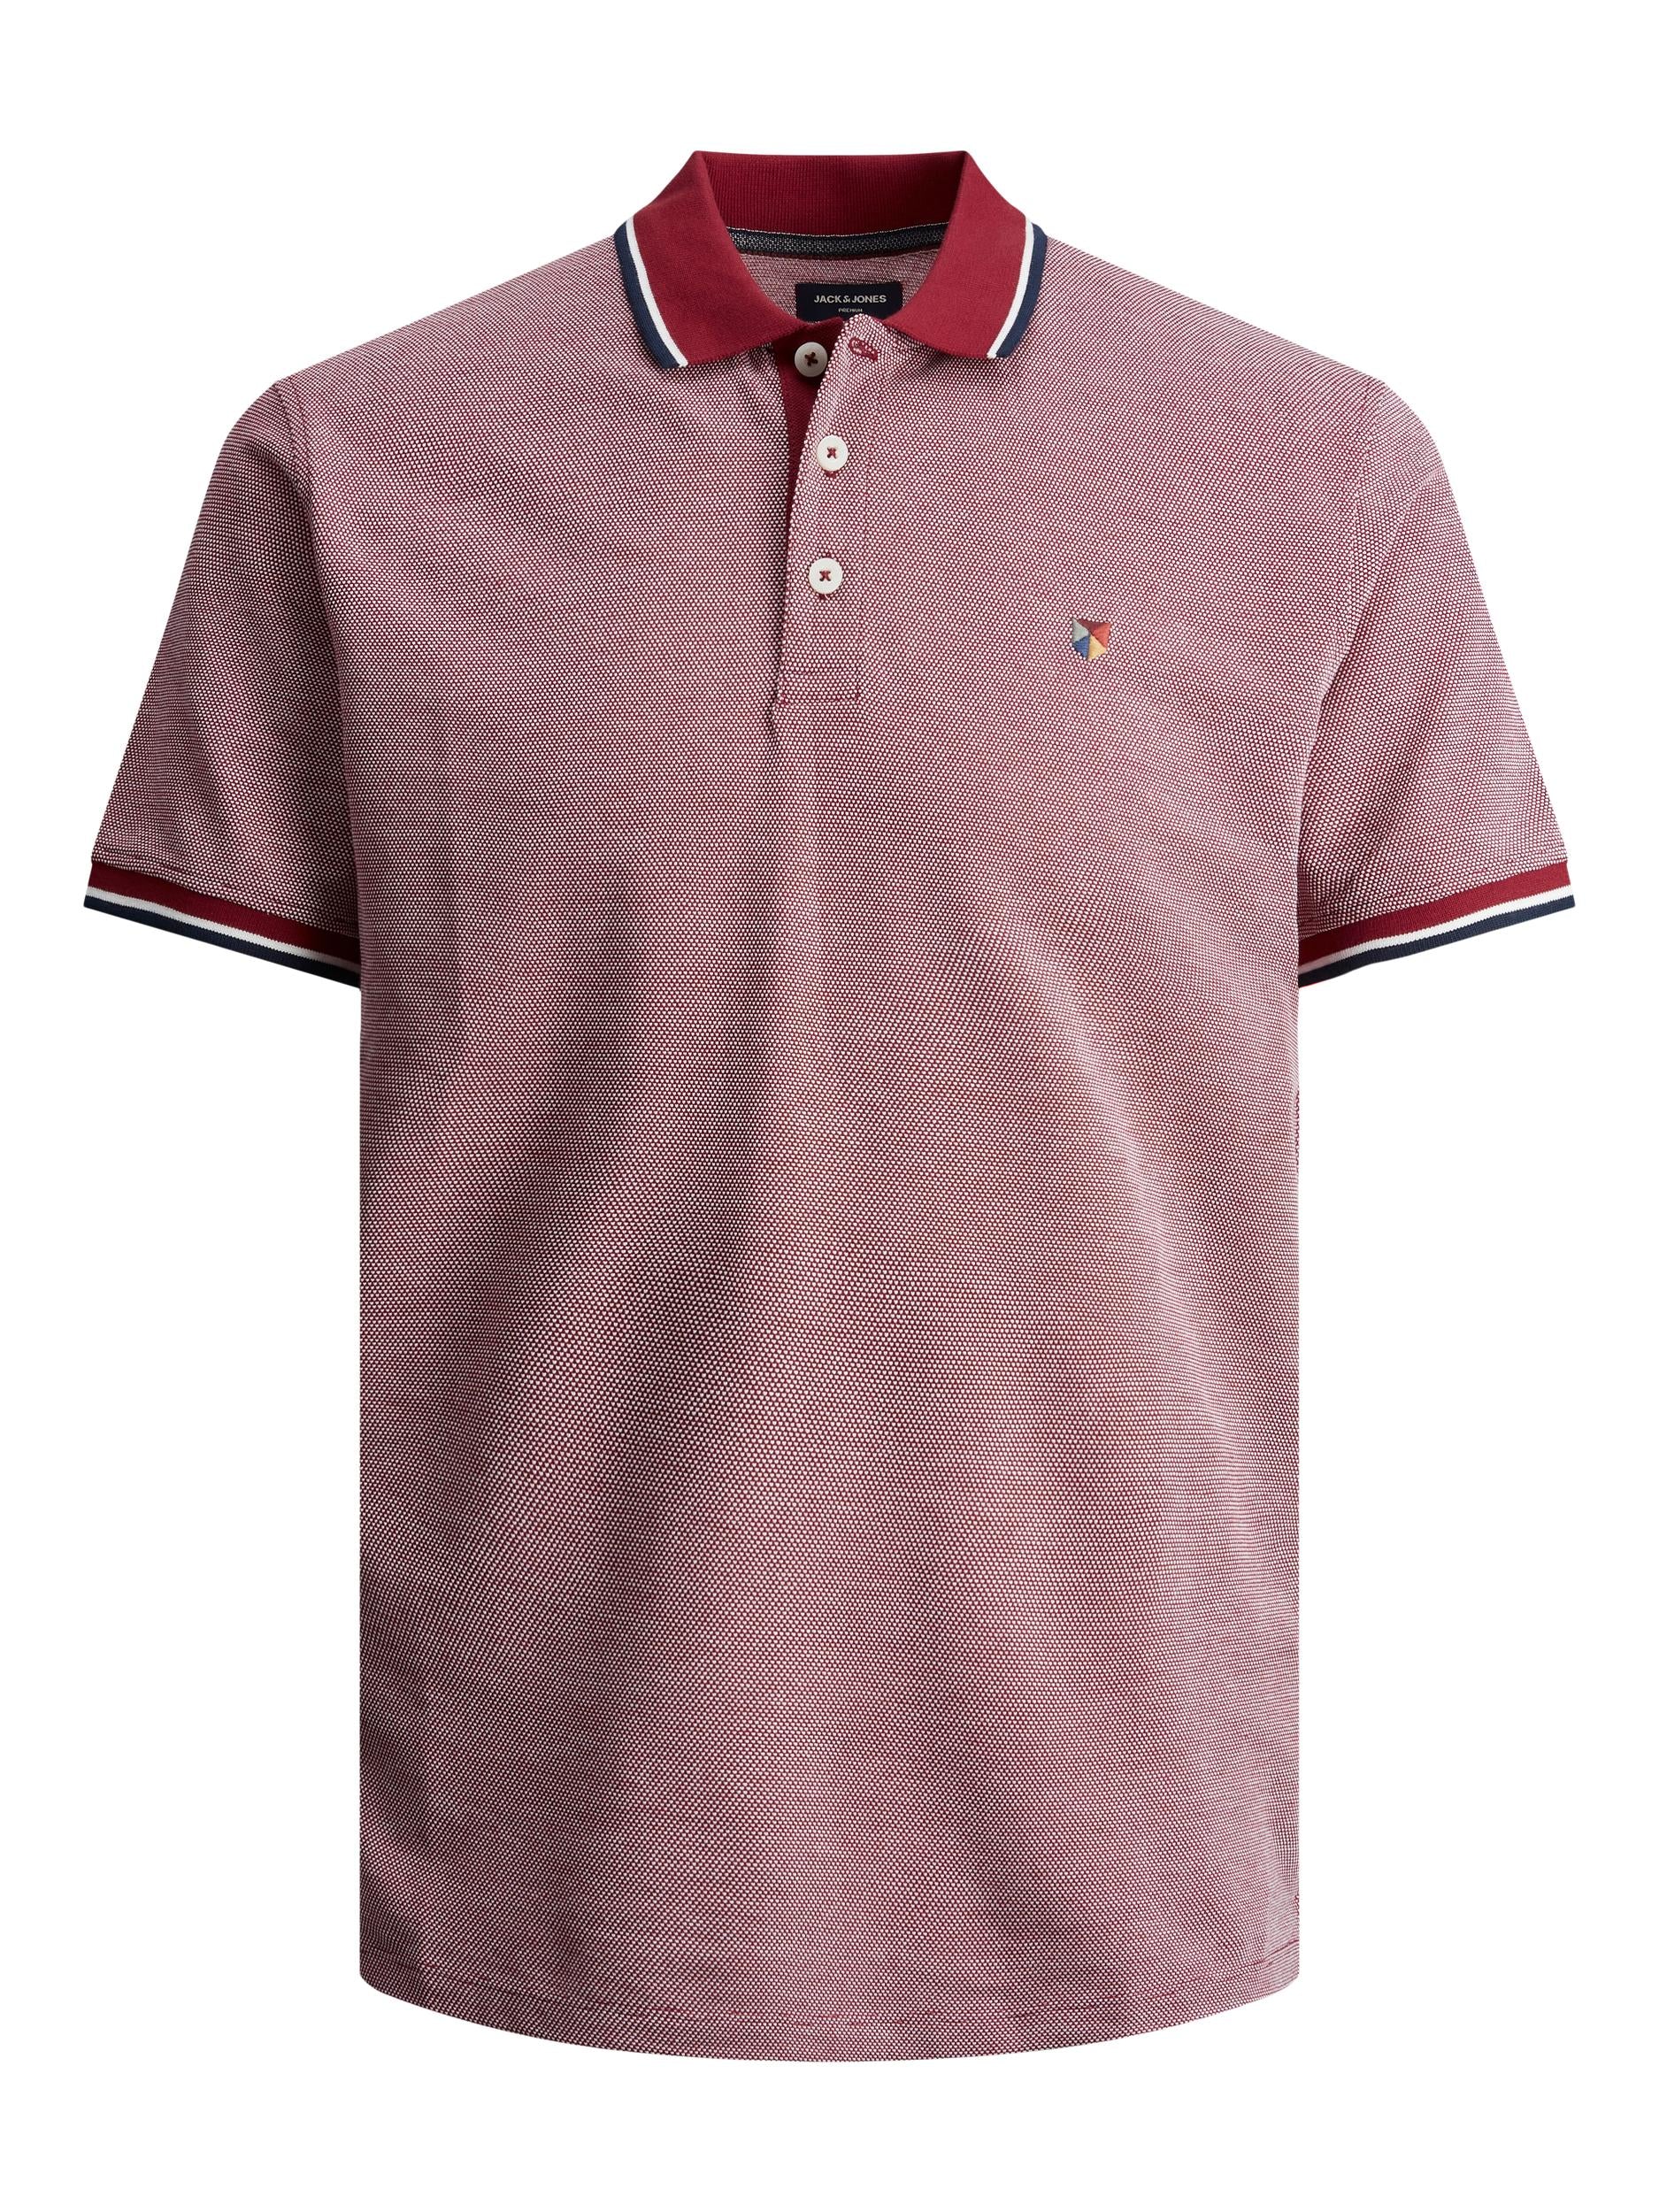 Bluwin SS Polo - Red Dahlia Full View